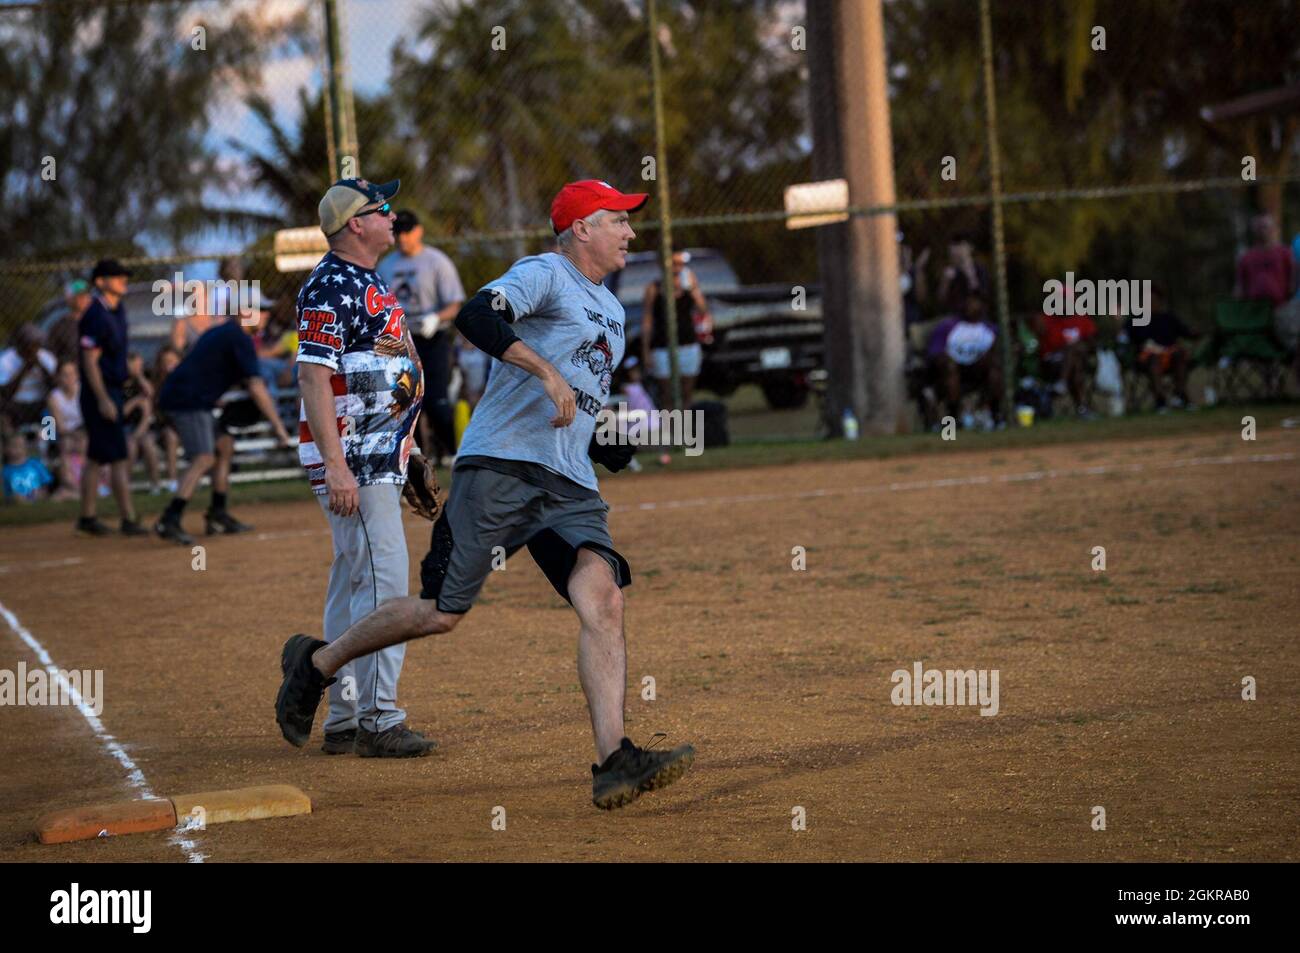 U.S. Air Force Brig. Gen. Jeremy Sloane, 36th Wing commander, runs passed first base during the Chief’s versus Eagle’s softball game at Andersen Air Force Base, Guam, June 18, 2021. The final score ended with the Eagle’s defeating the Chief’s 18 to 14. Stock Photo